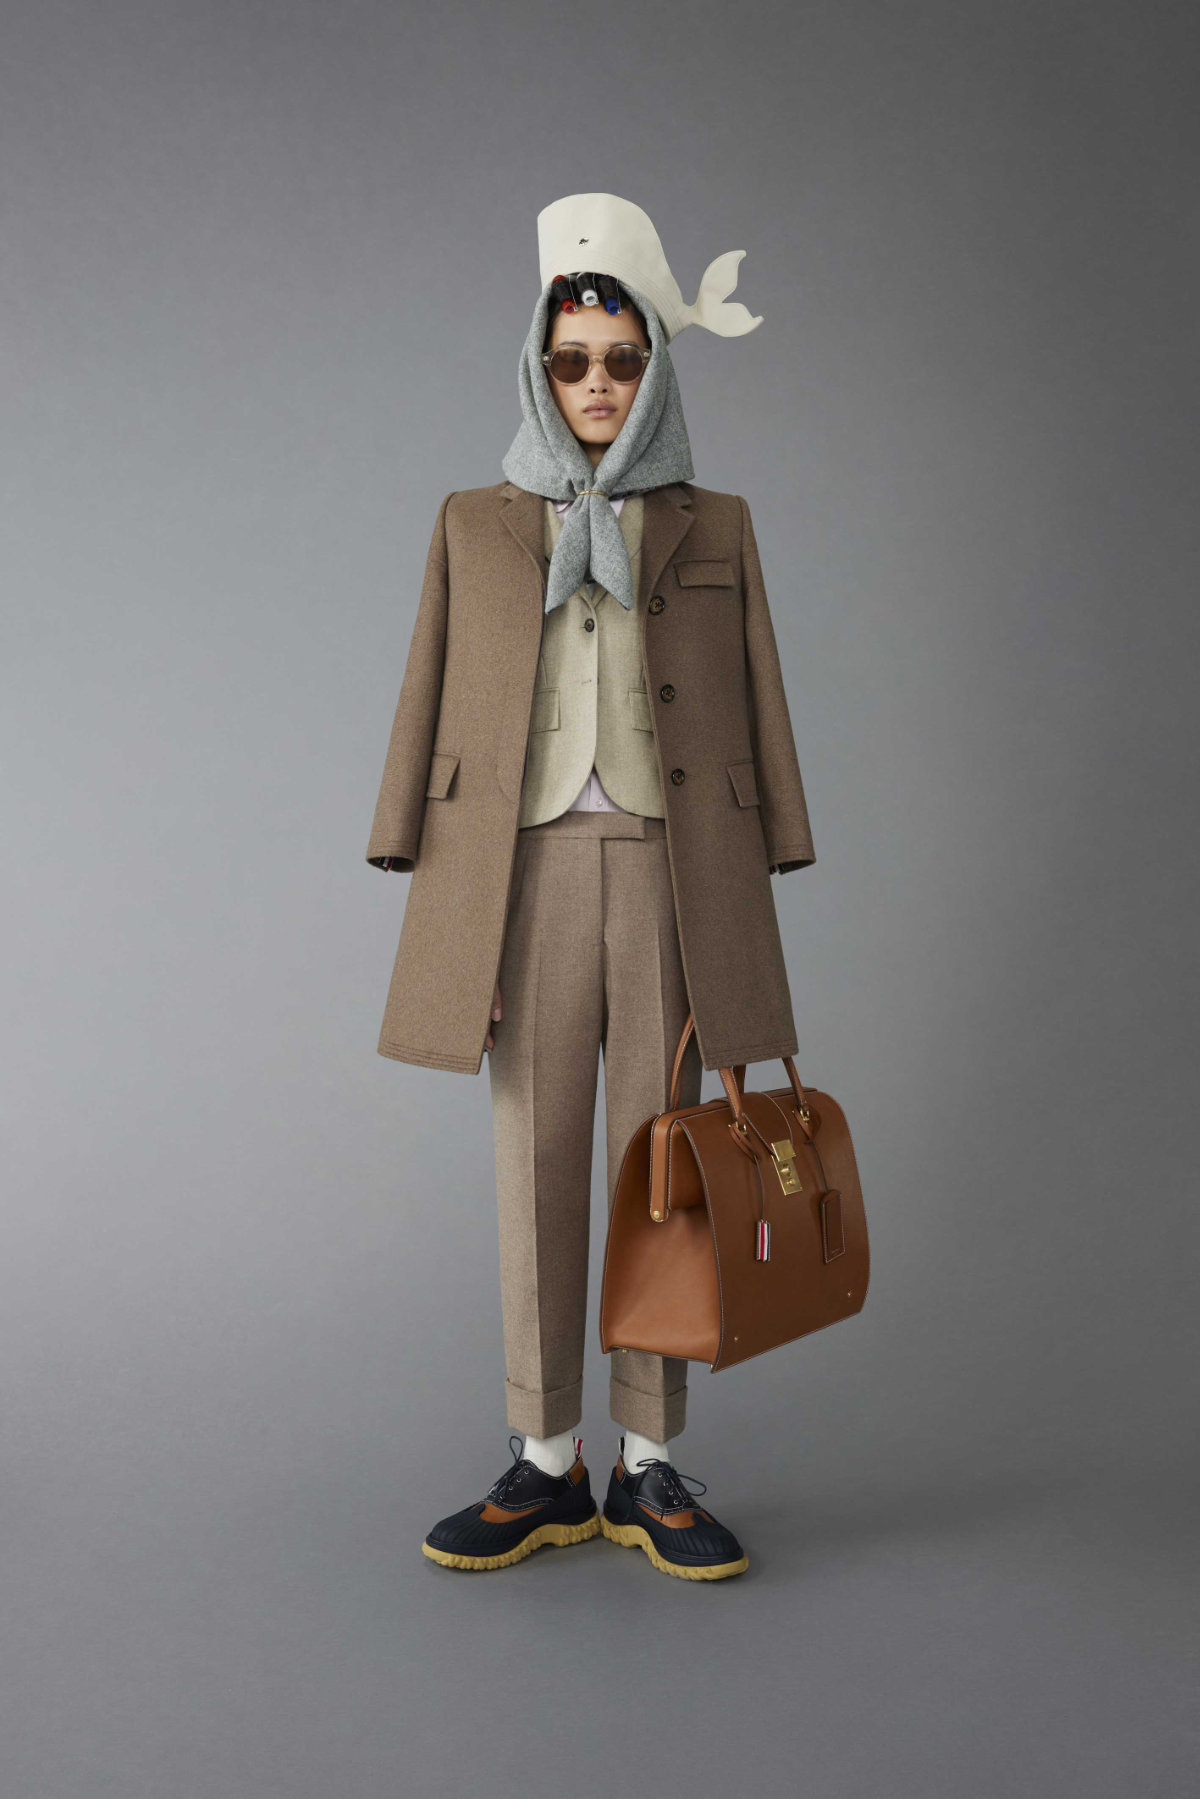 Thom Browne Presents His New Women's Fall 2023 Collection